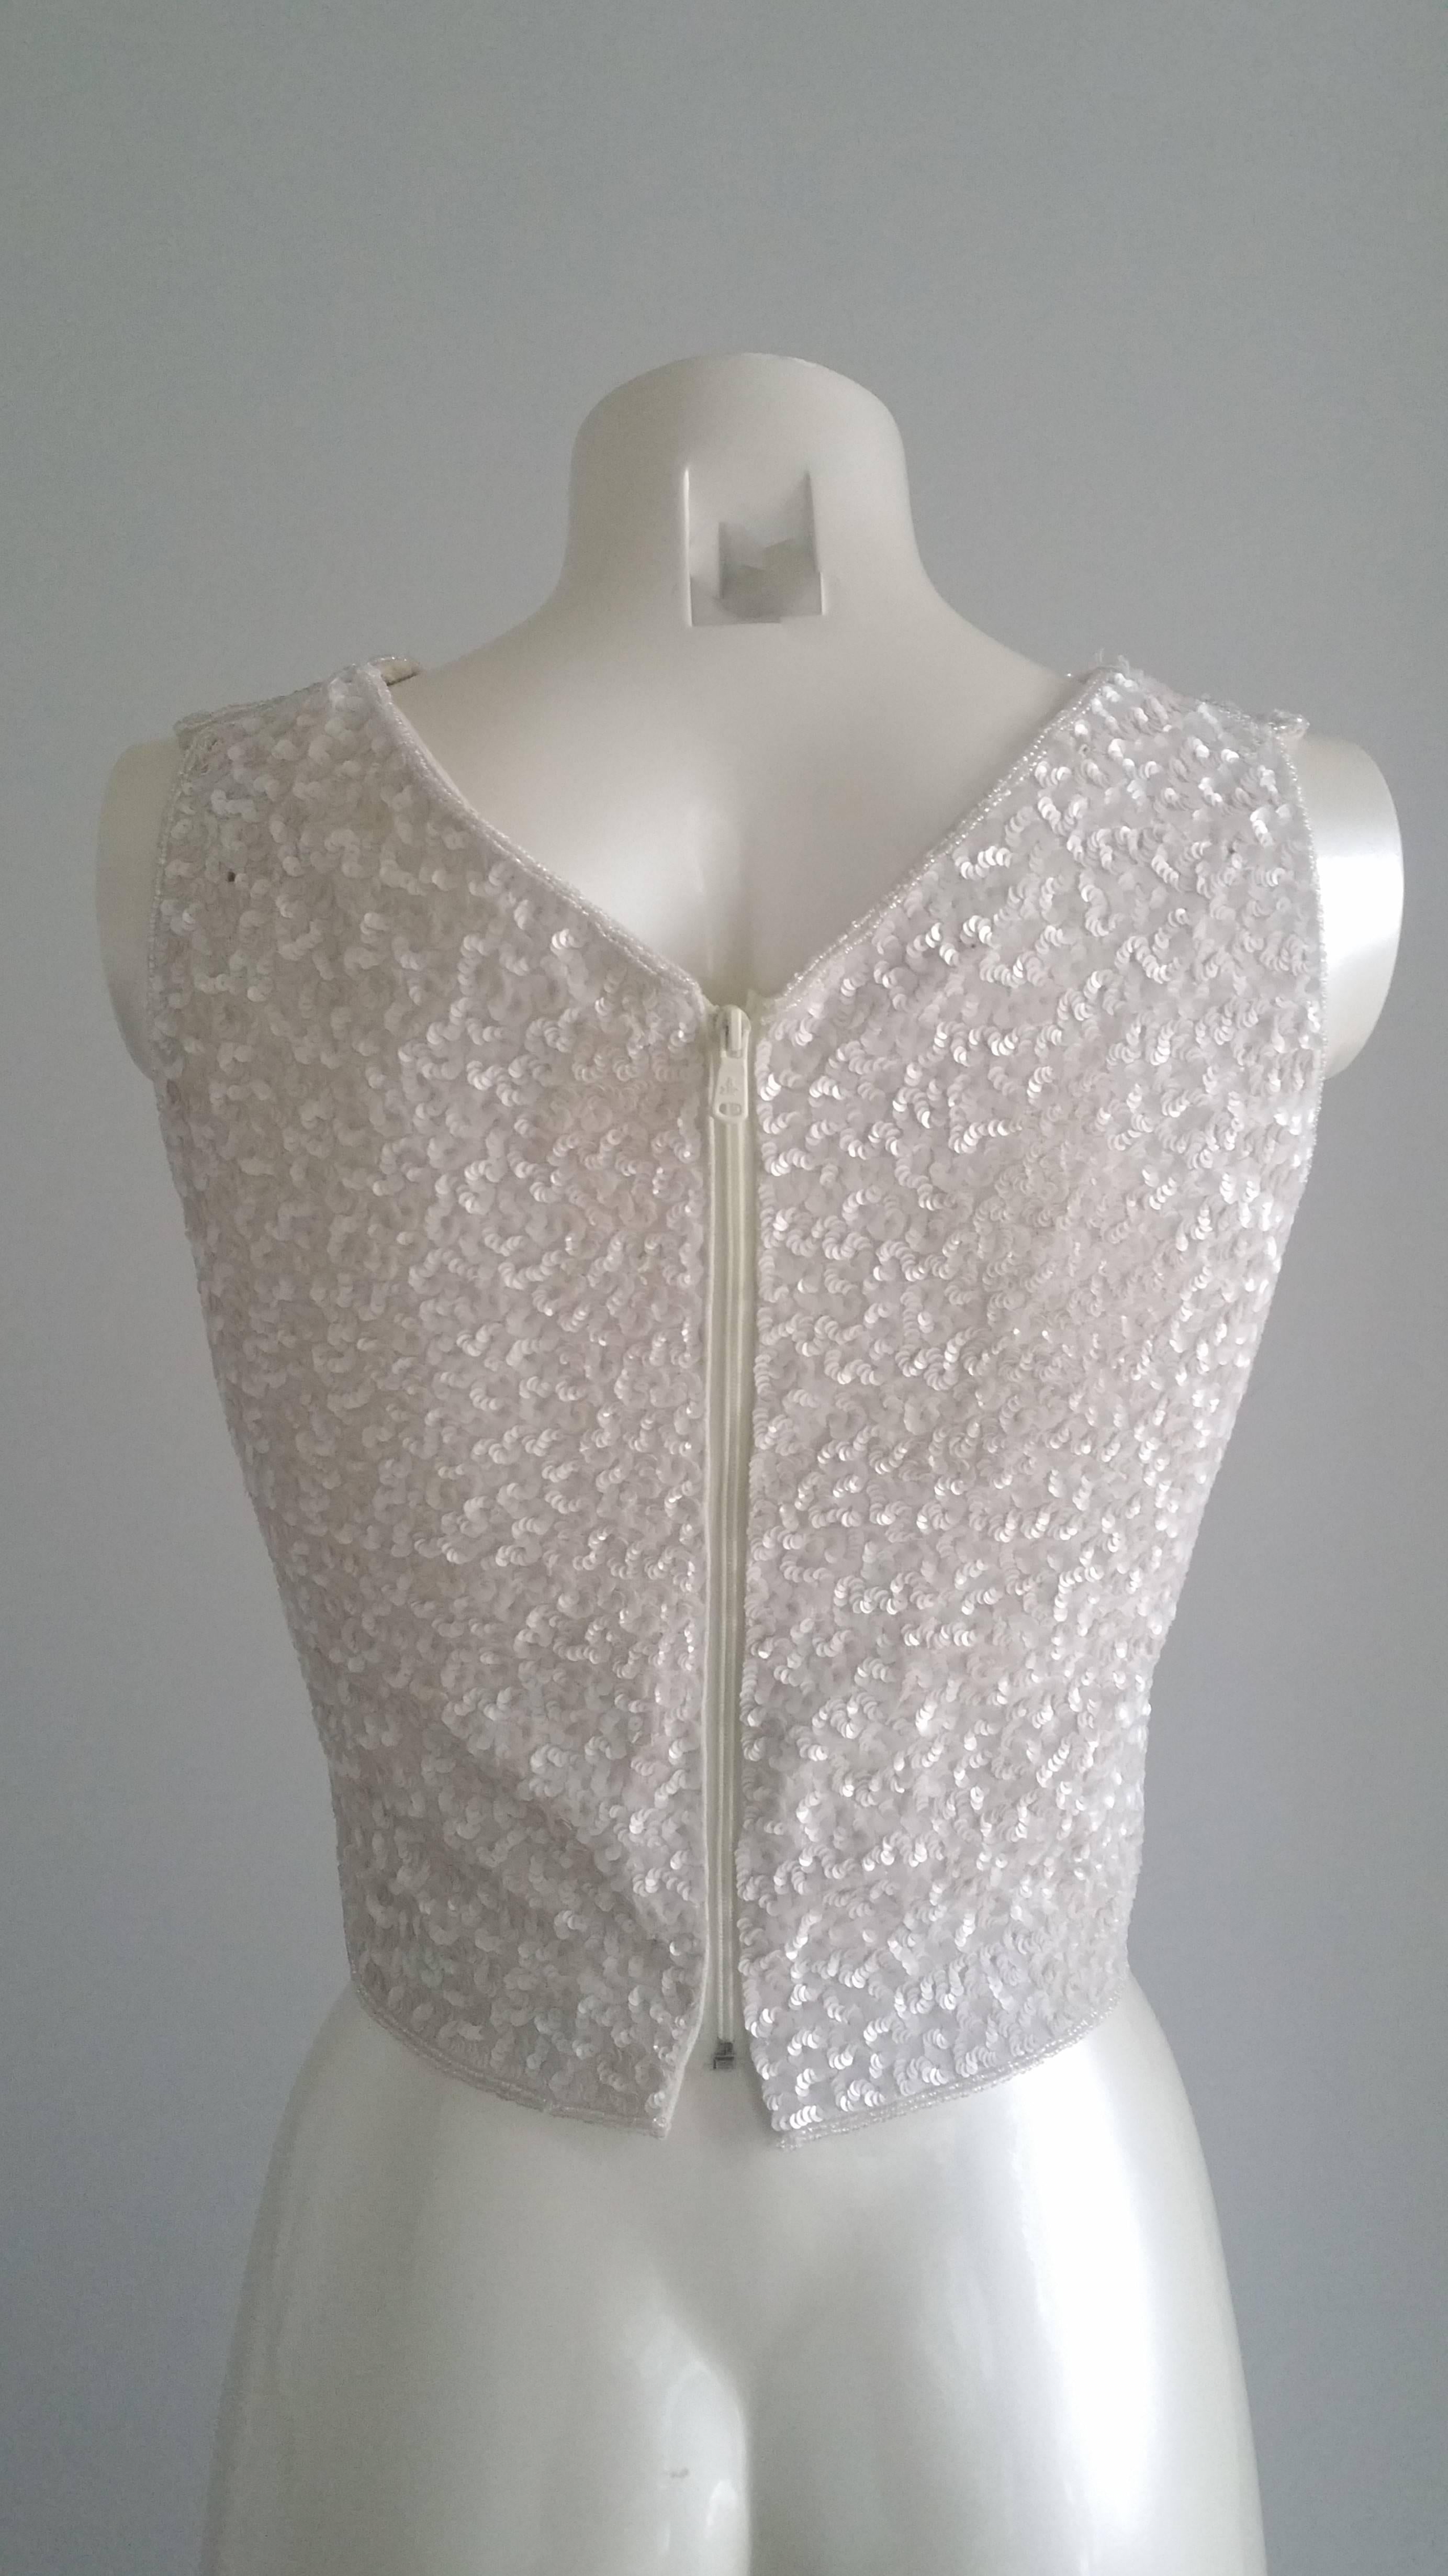 Women's 1970s Tailor made white with sequins shirt 